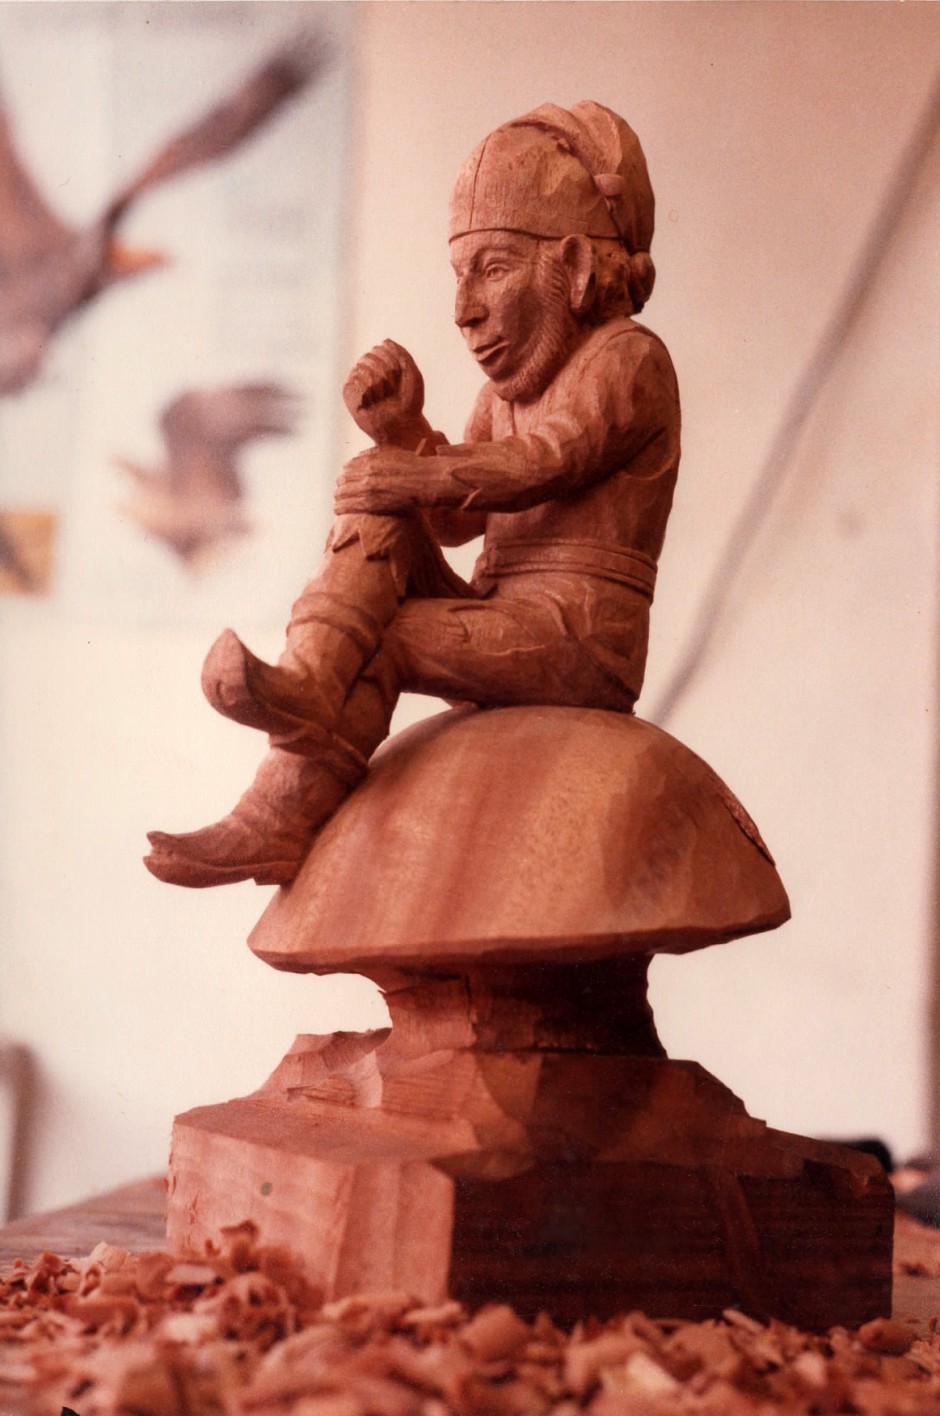 Three Quarter View Of The Gnome On His Toadstool - gnome, wood carving, wood carver